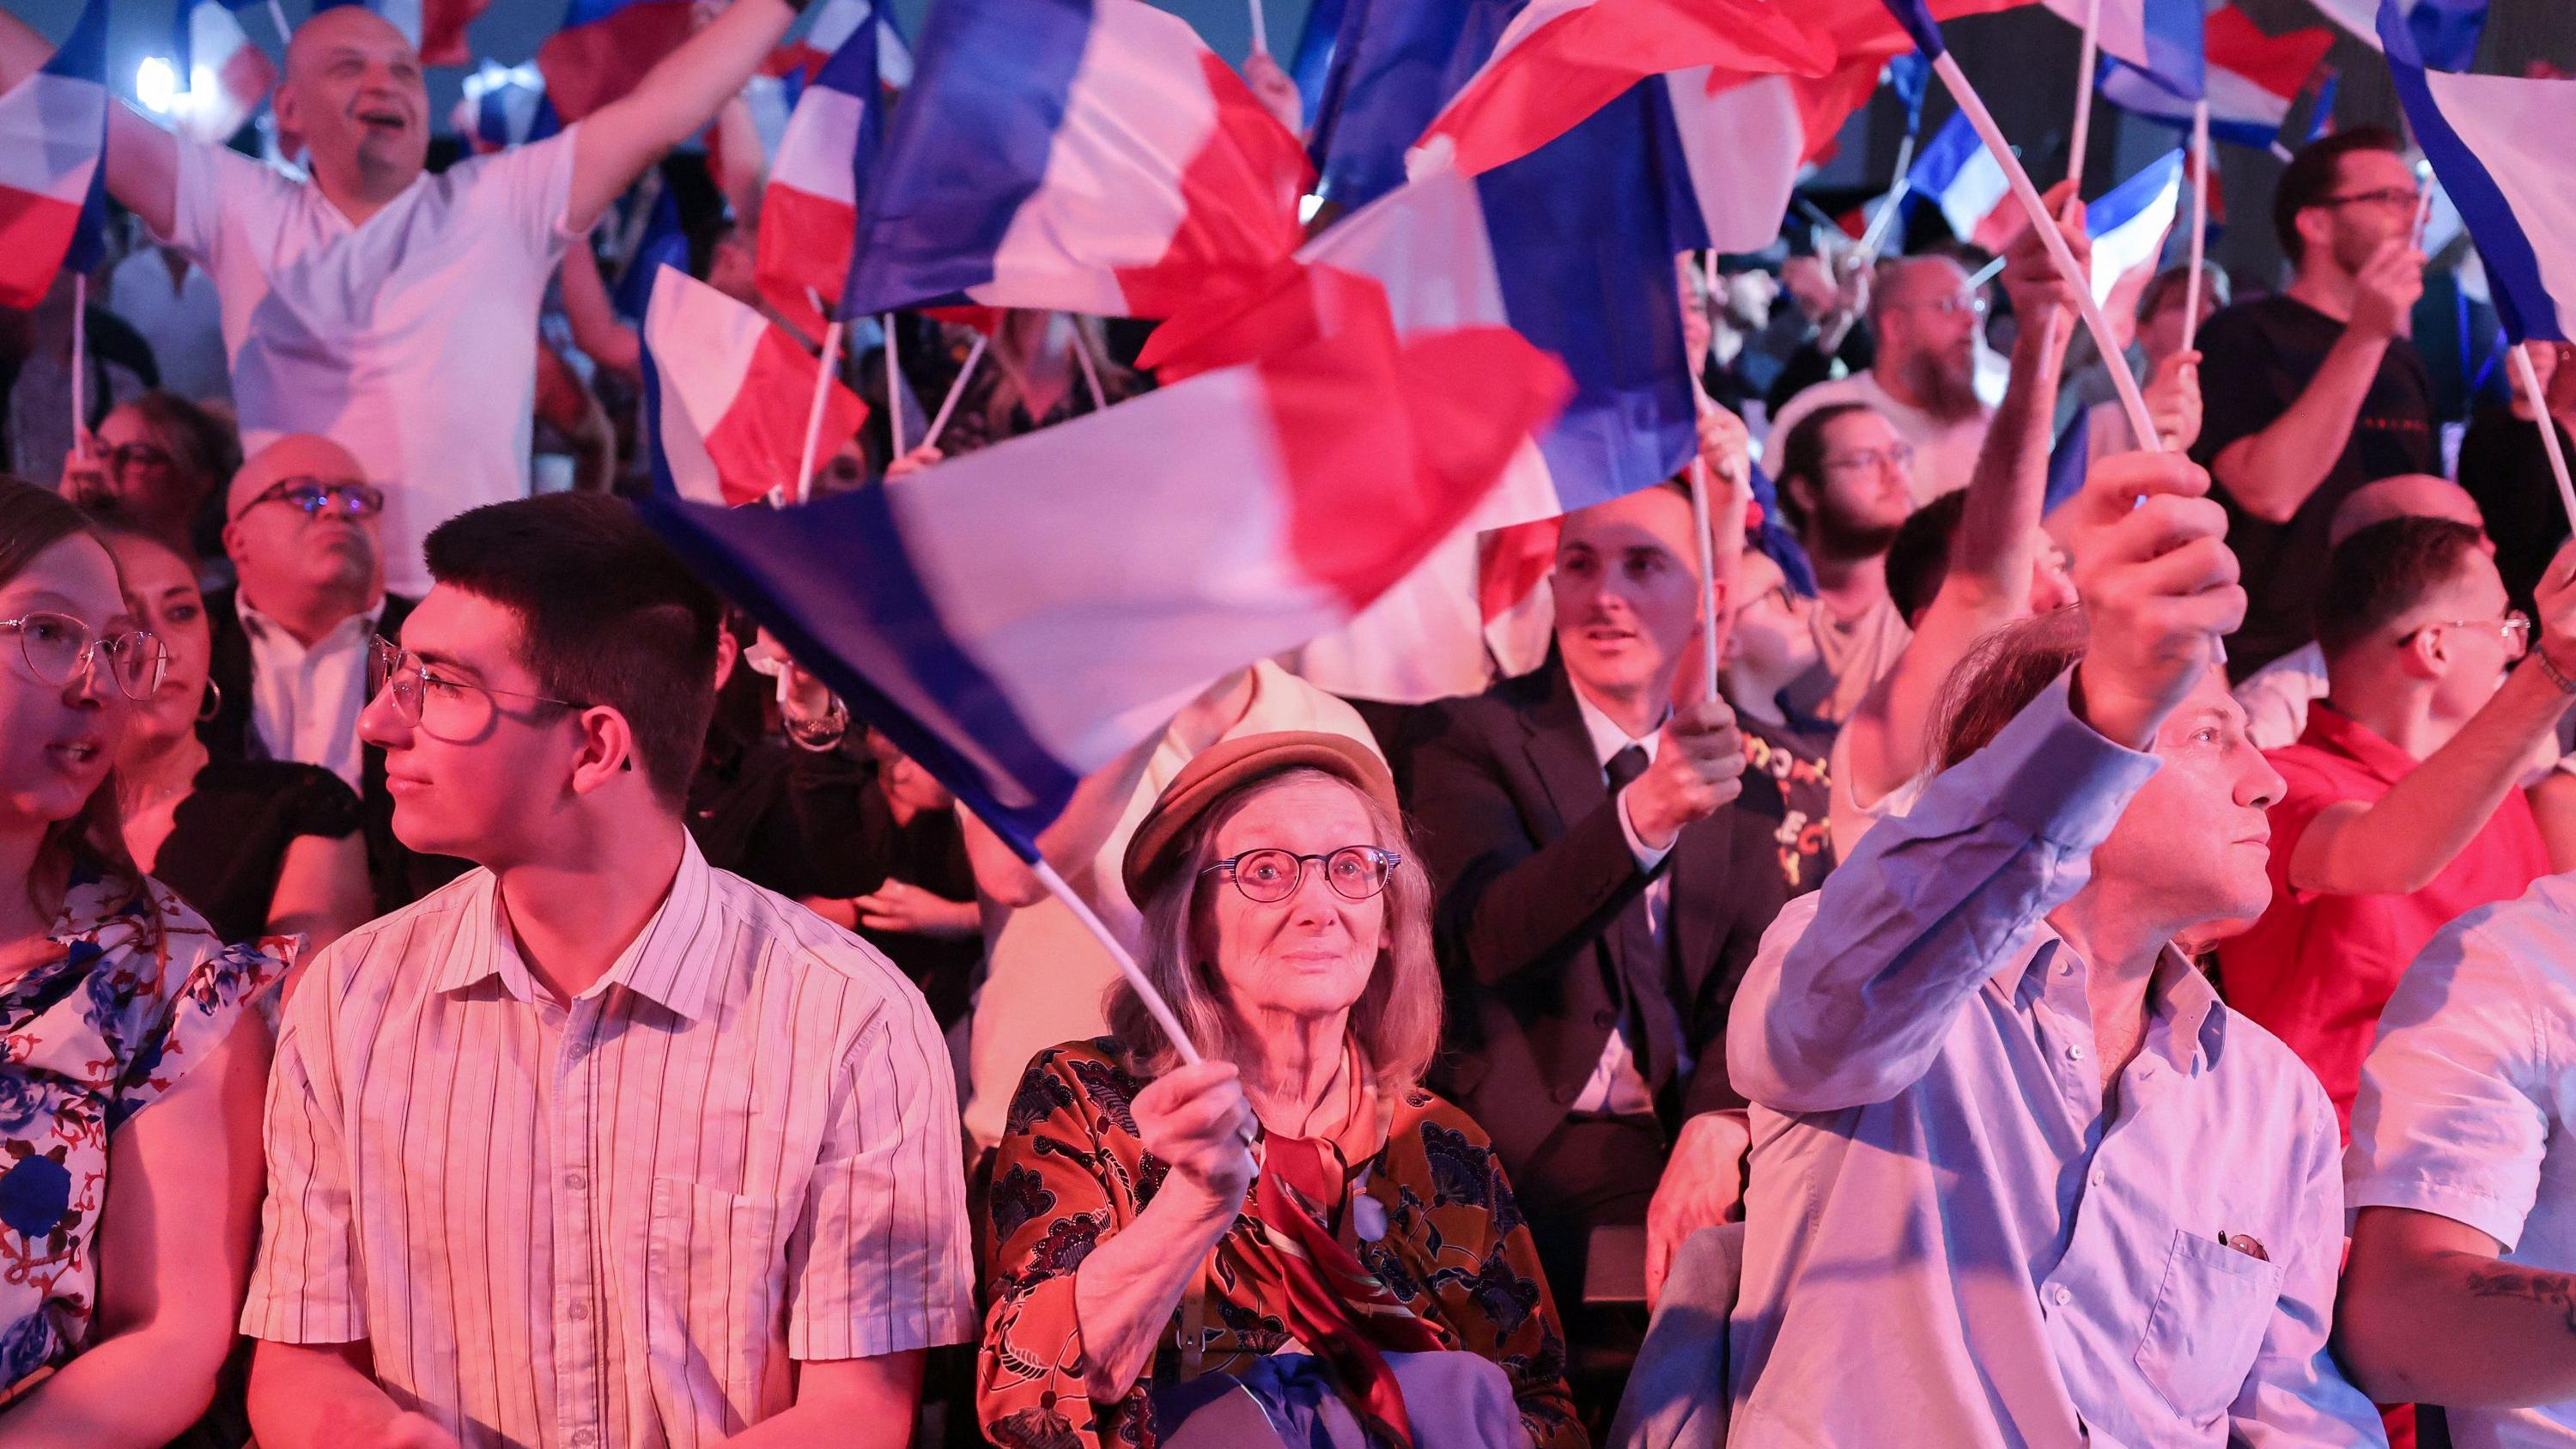 Analysis: Frances far right now dominant political force 